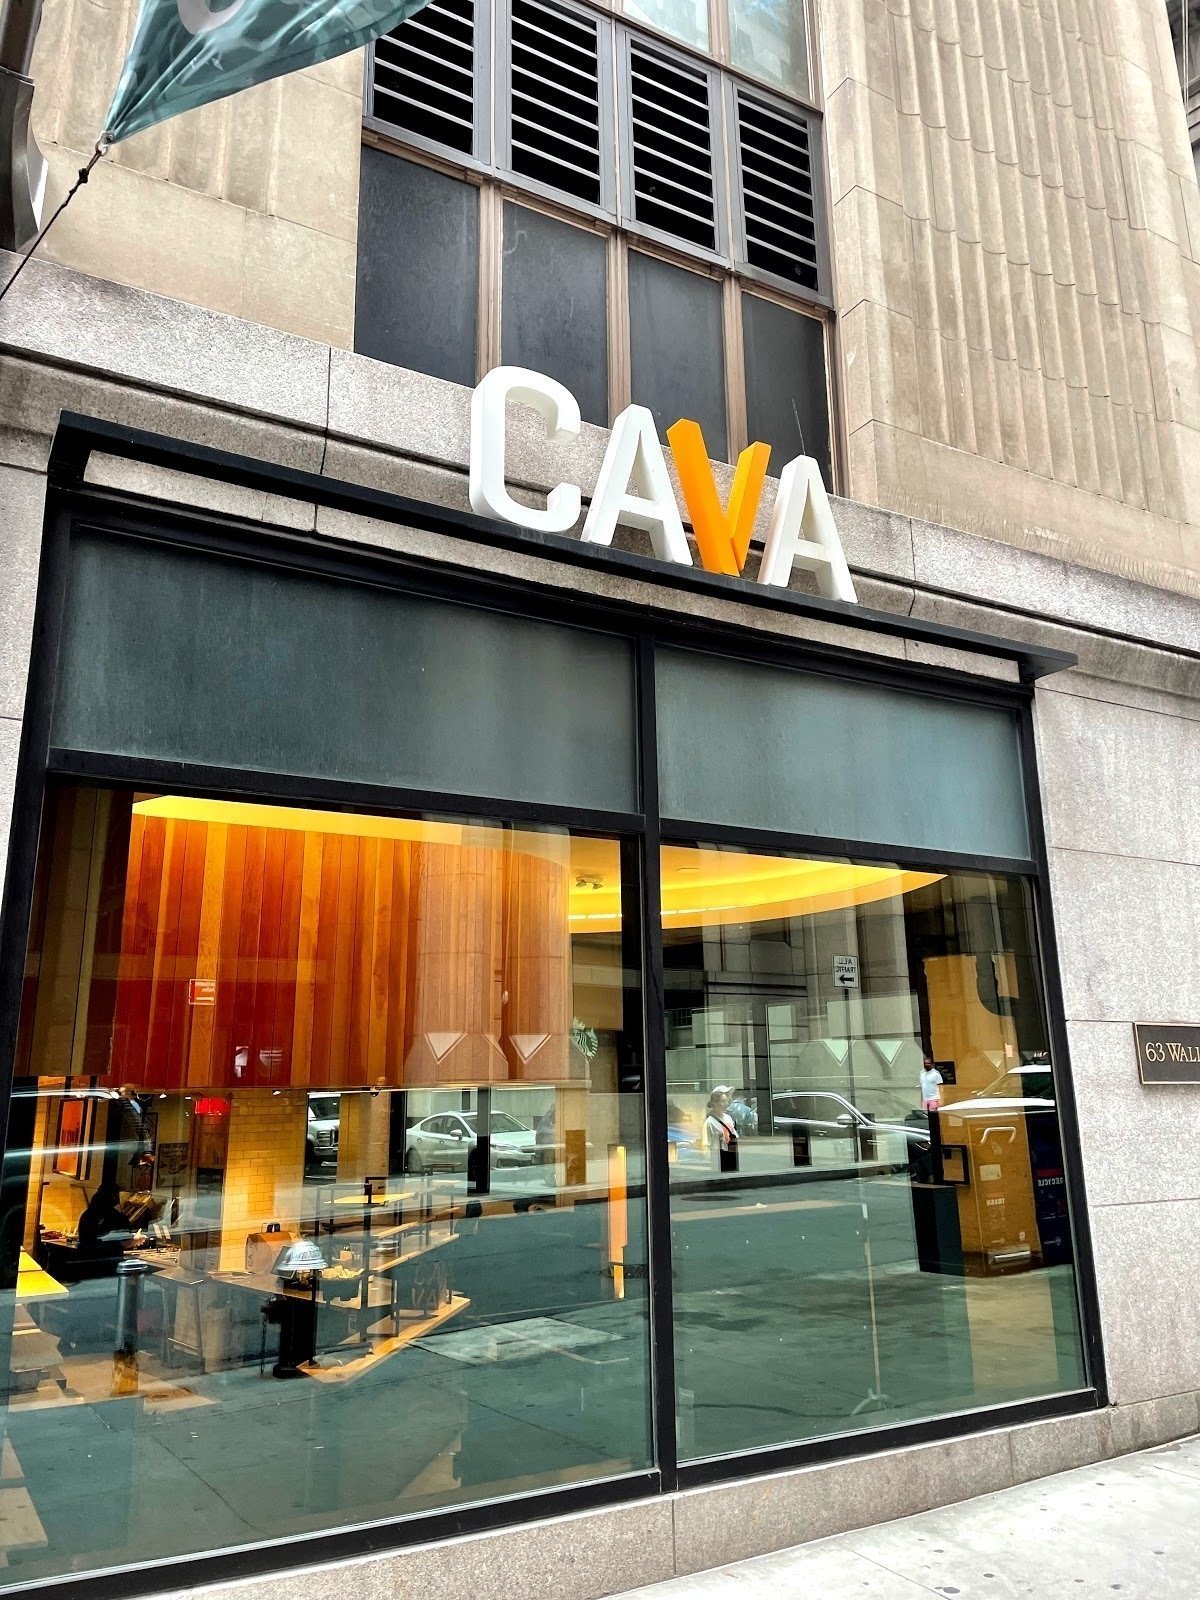 <span class="translation_missing" title="translation missing: en.meta.location_title, location_name: CAVA, city: New York">Location Title</span>